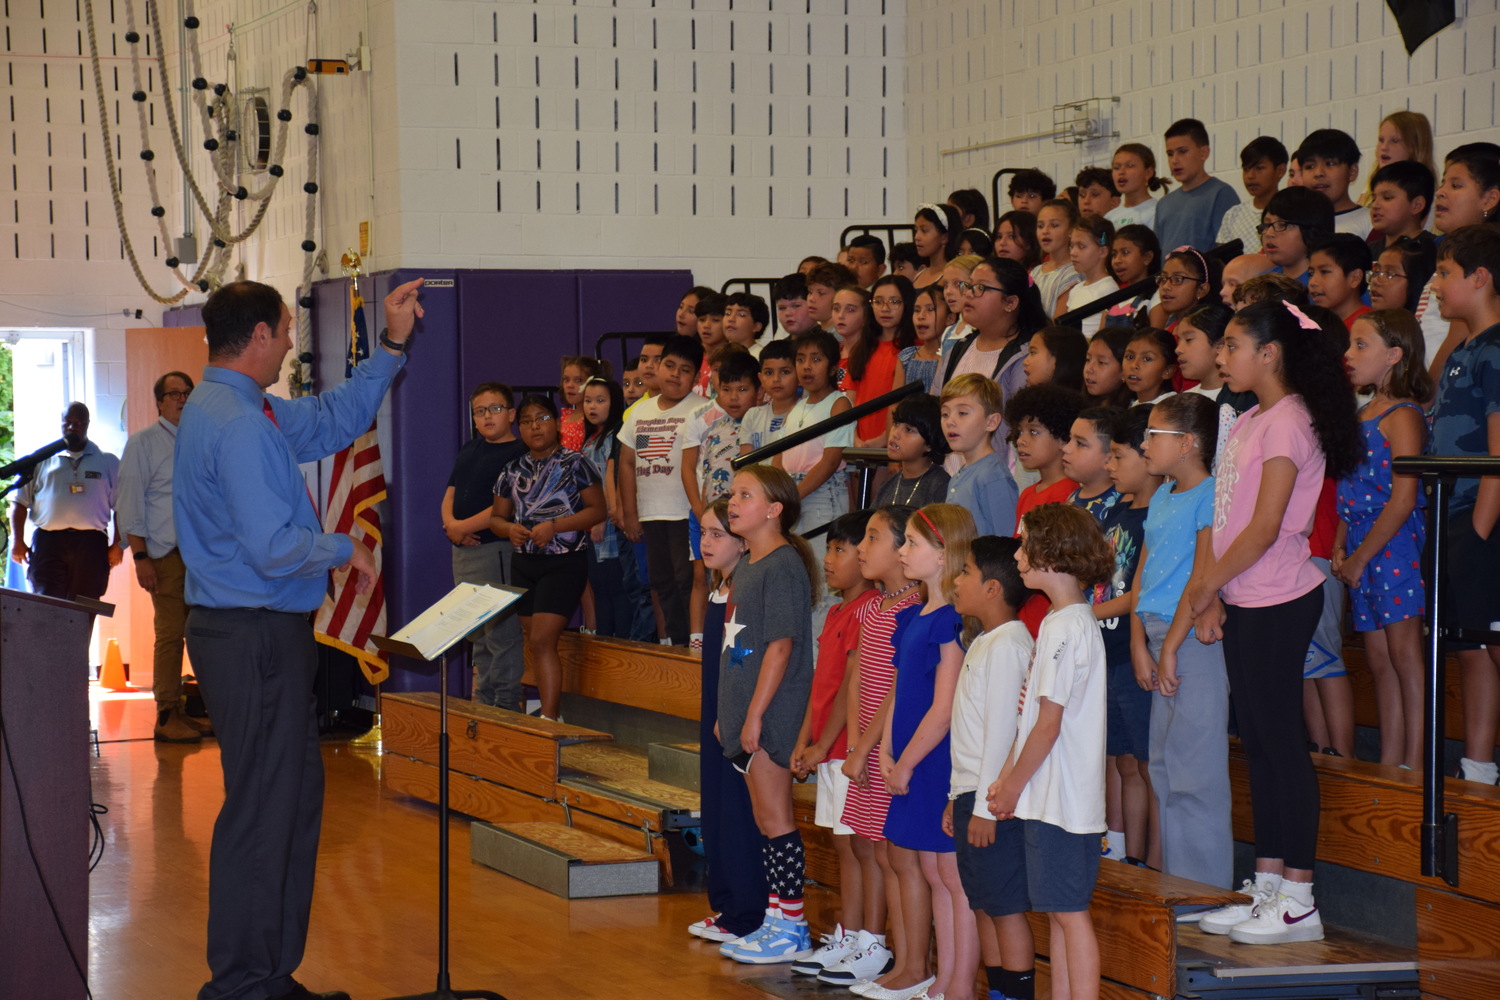 Hampton Bays Elementary School marked the anniversary of 9/11 with a memorial ceremony, during which fourth graders read poems and essays that they wrote about what it means to be a hero and sang patriotic songs, and the Hampton Bays Fire Department presented a memorial wreath. COURTESY HAMPTON BAYS SCHOOL DISTRICT